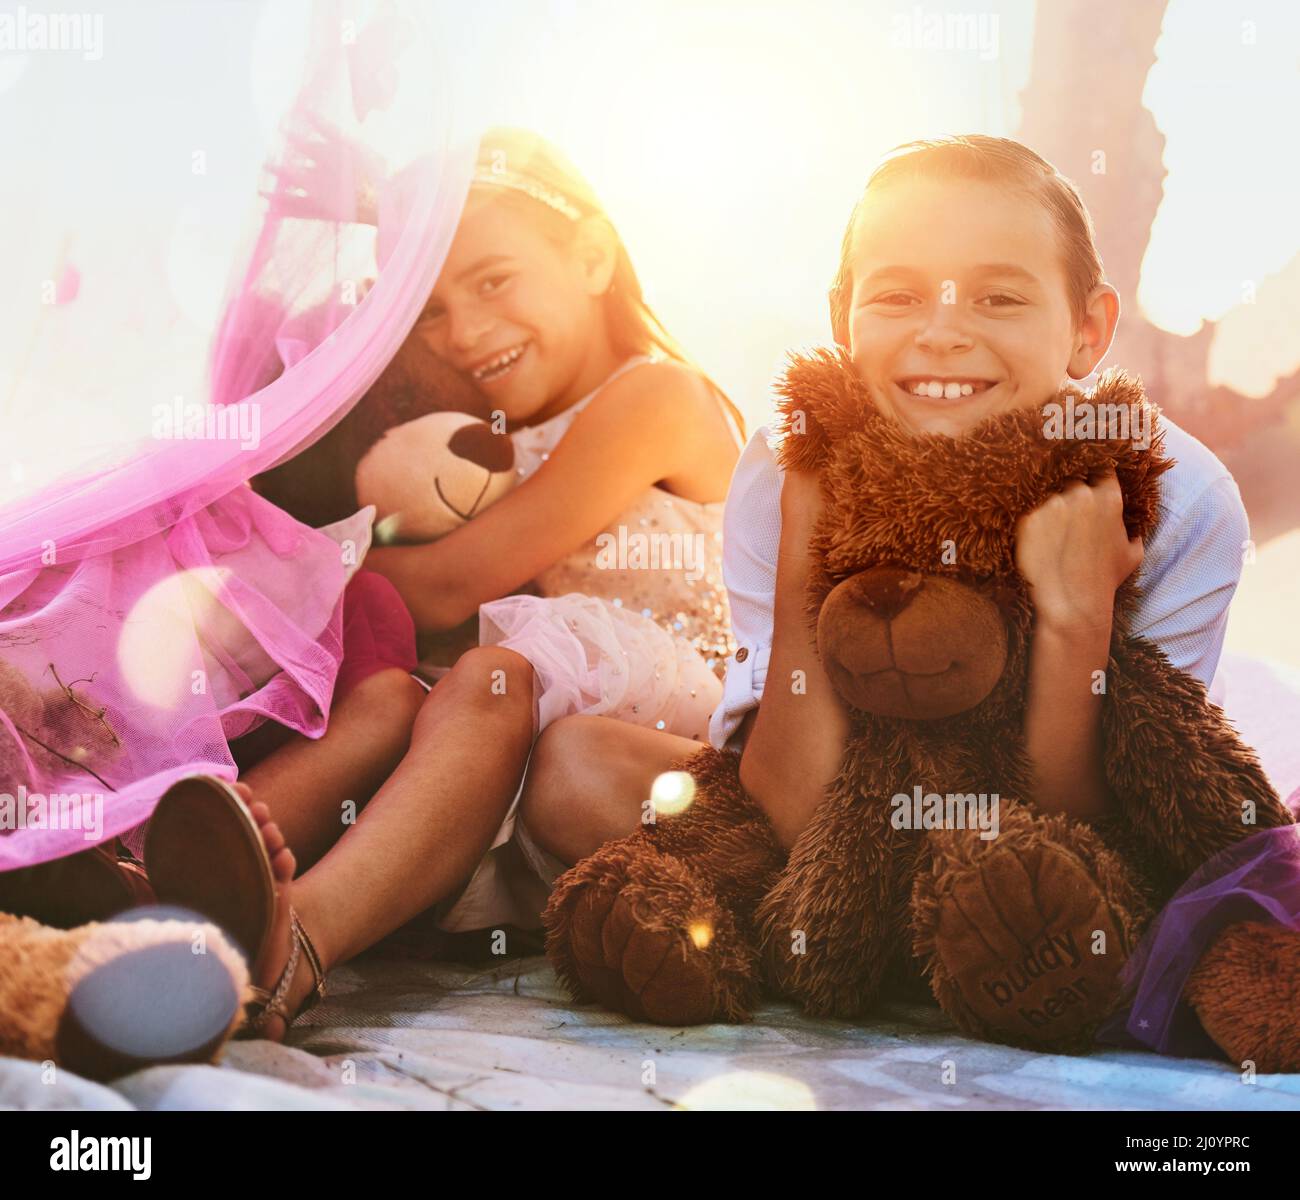 We both have our favourite teddybear. Shot of an adorable little brother and sister playing outdoors. Stock Photo